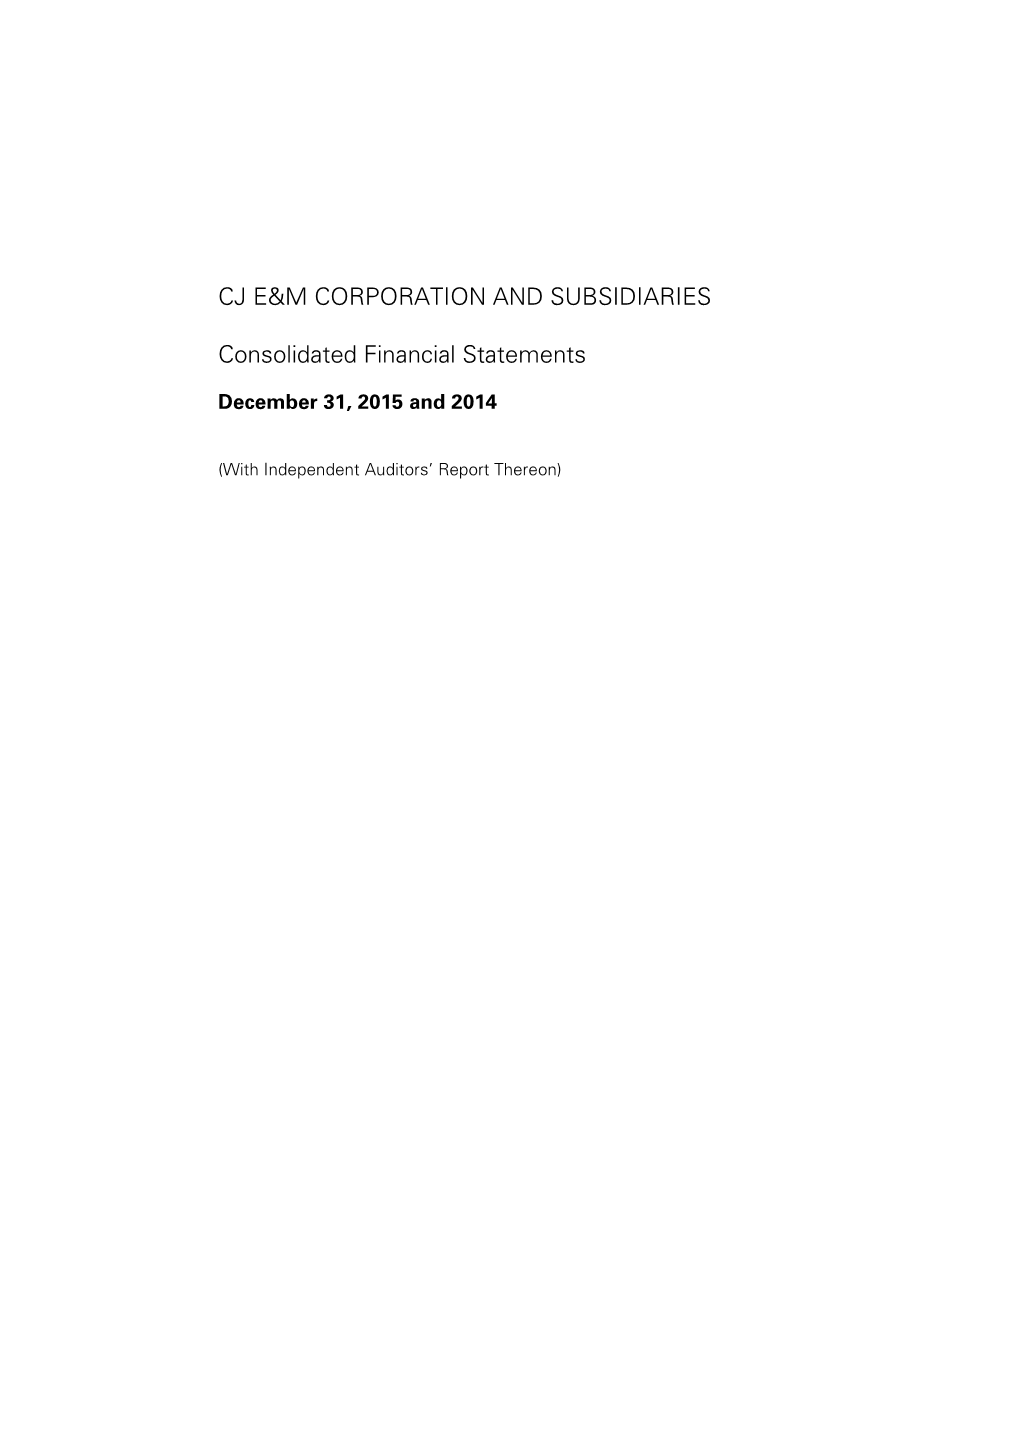 CJ E&M CORPORATION and SUBSIDIARIES Consolidated